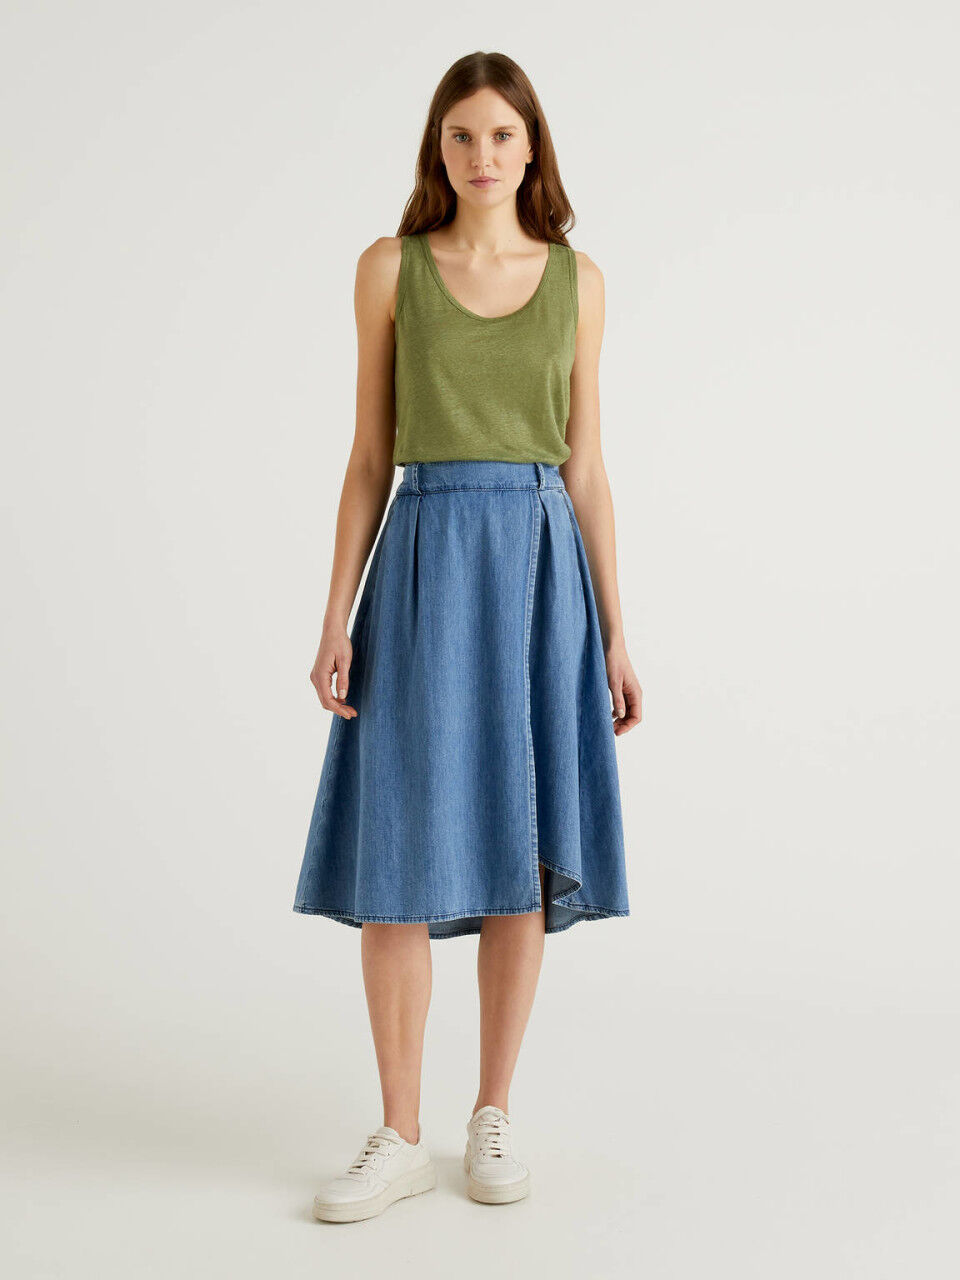 Women's Skirts New Collection 2021 | Benetton